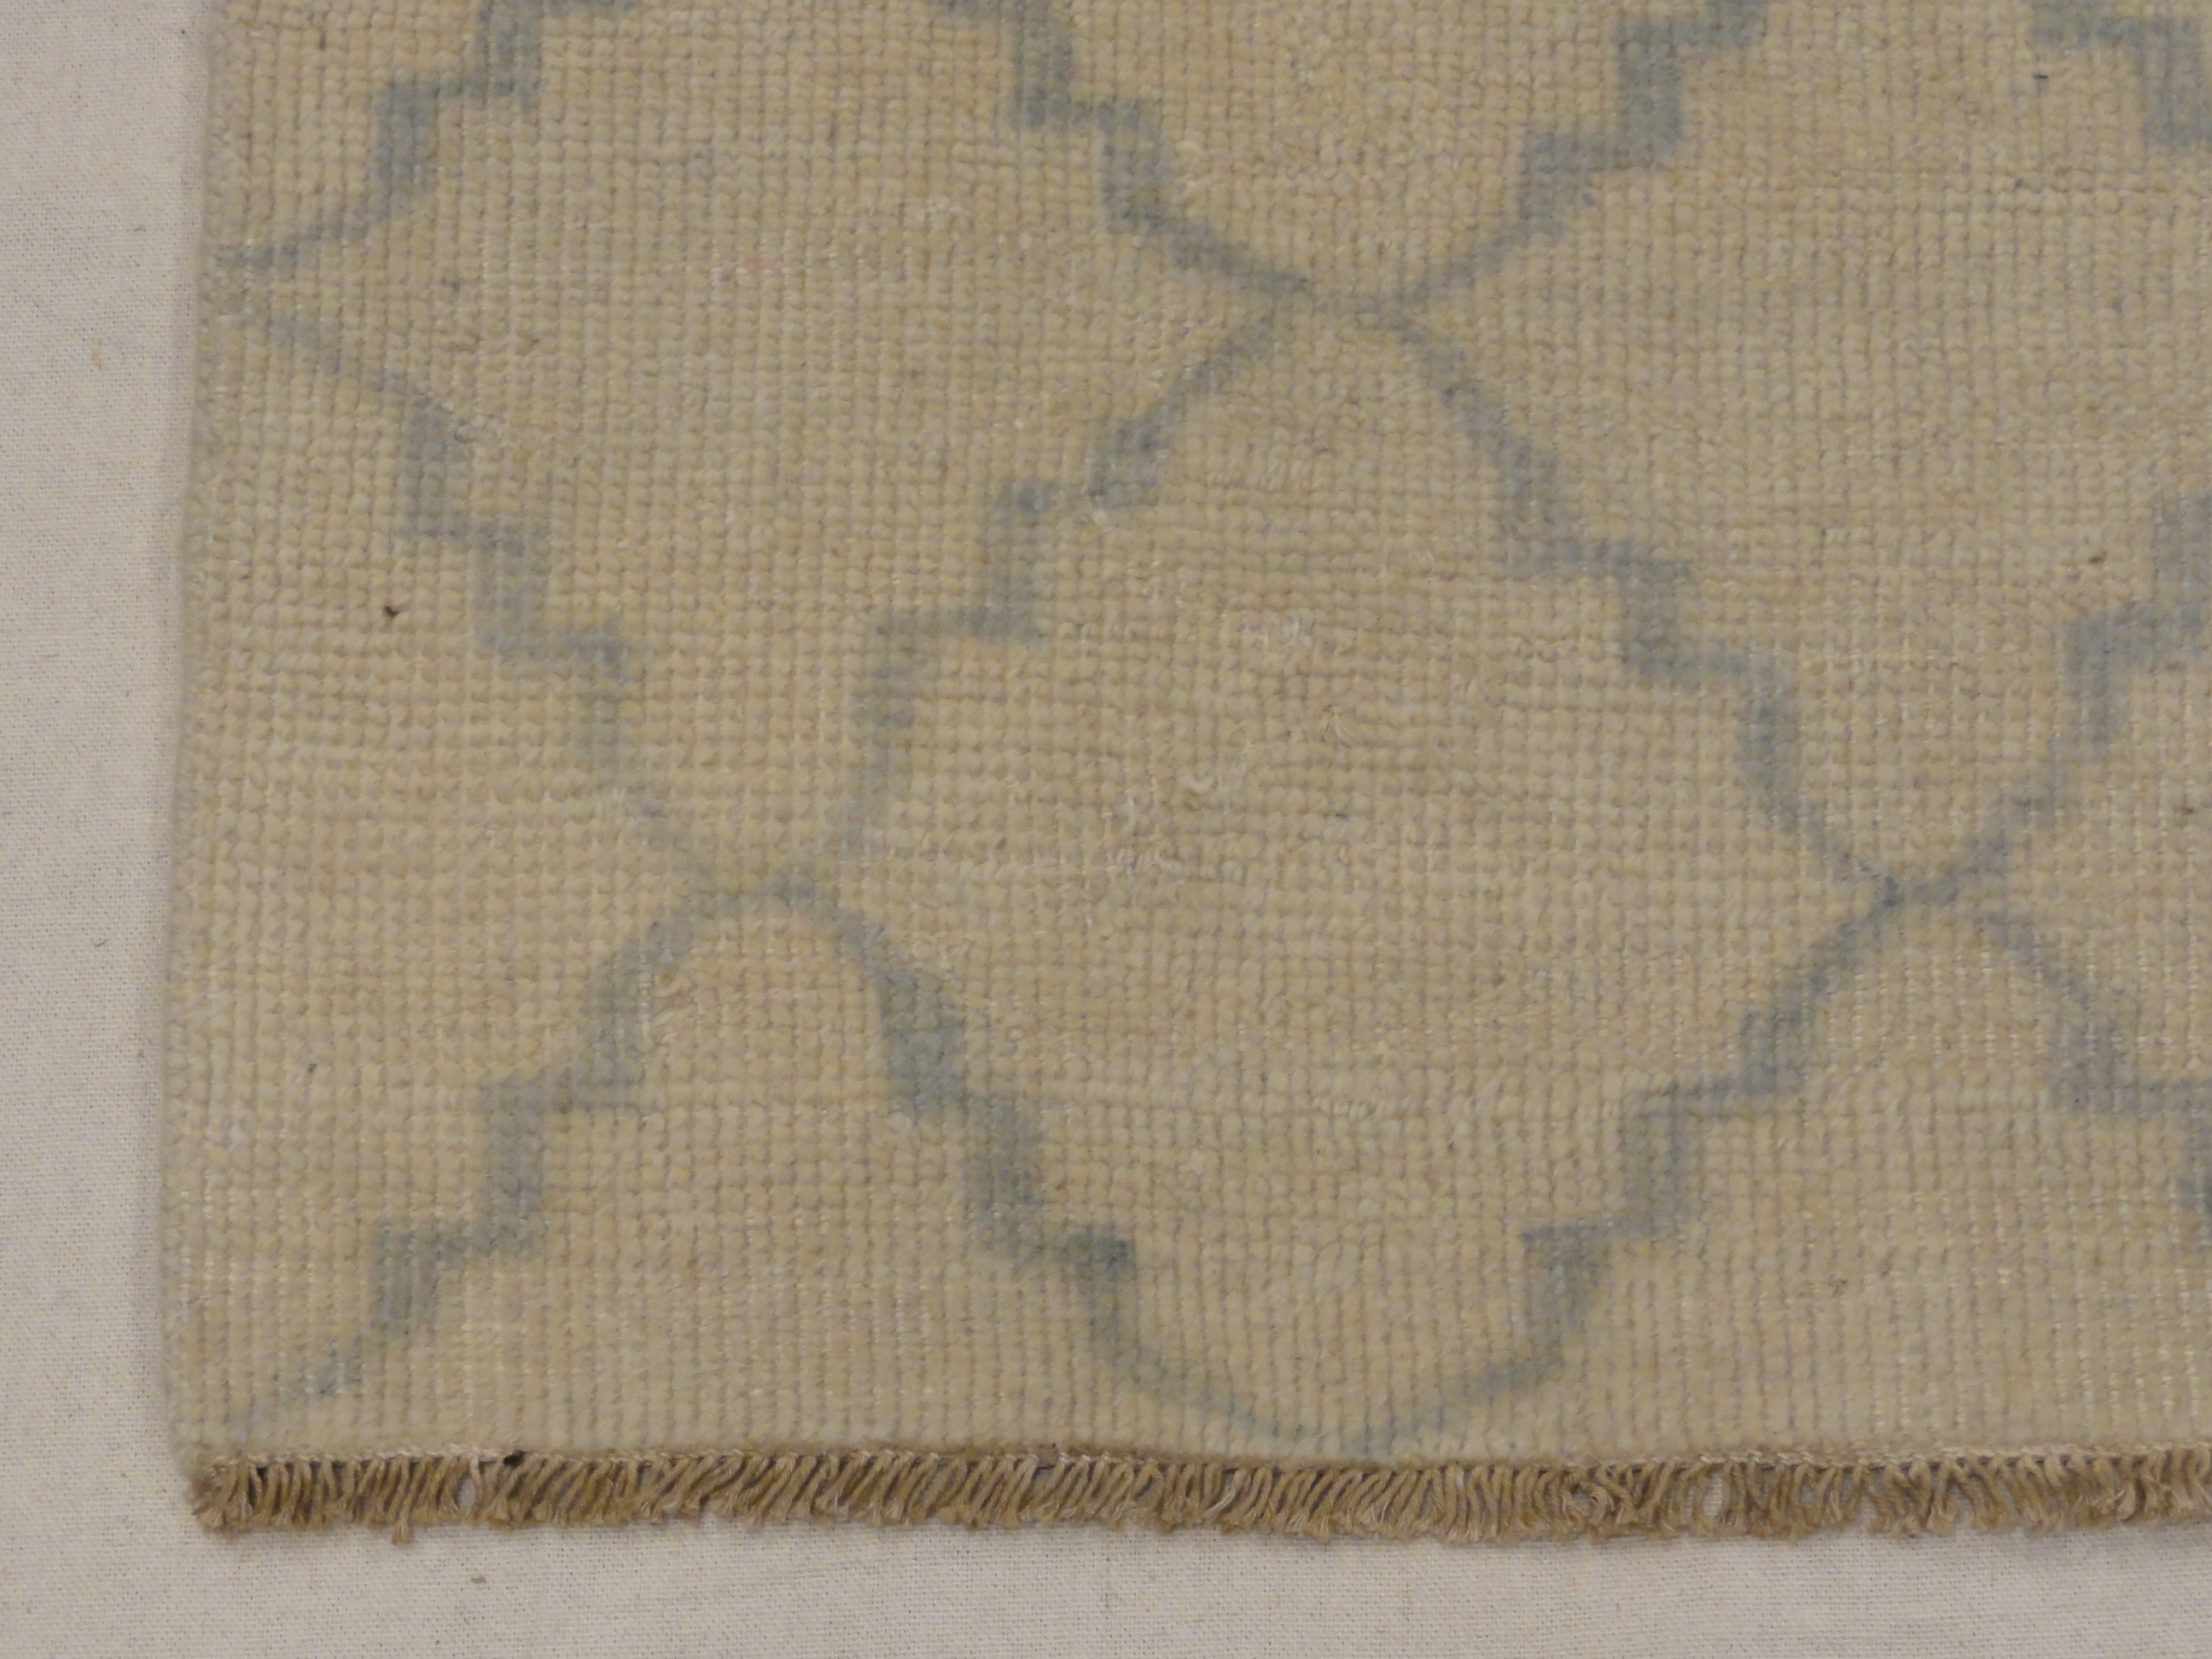 Blue and Beige Modern Trellised Rug. A piece of genuine woven carpet art sold by the Santa Barbara Design Center, Rugs and More.